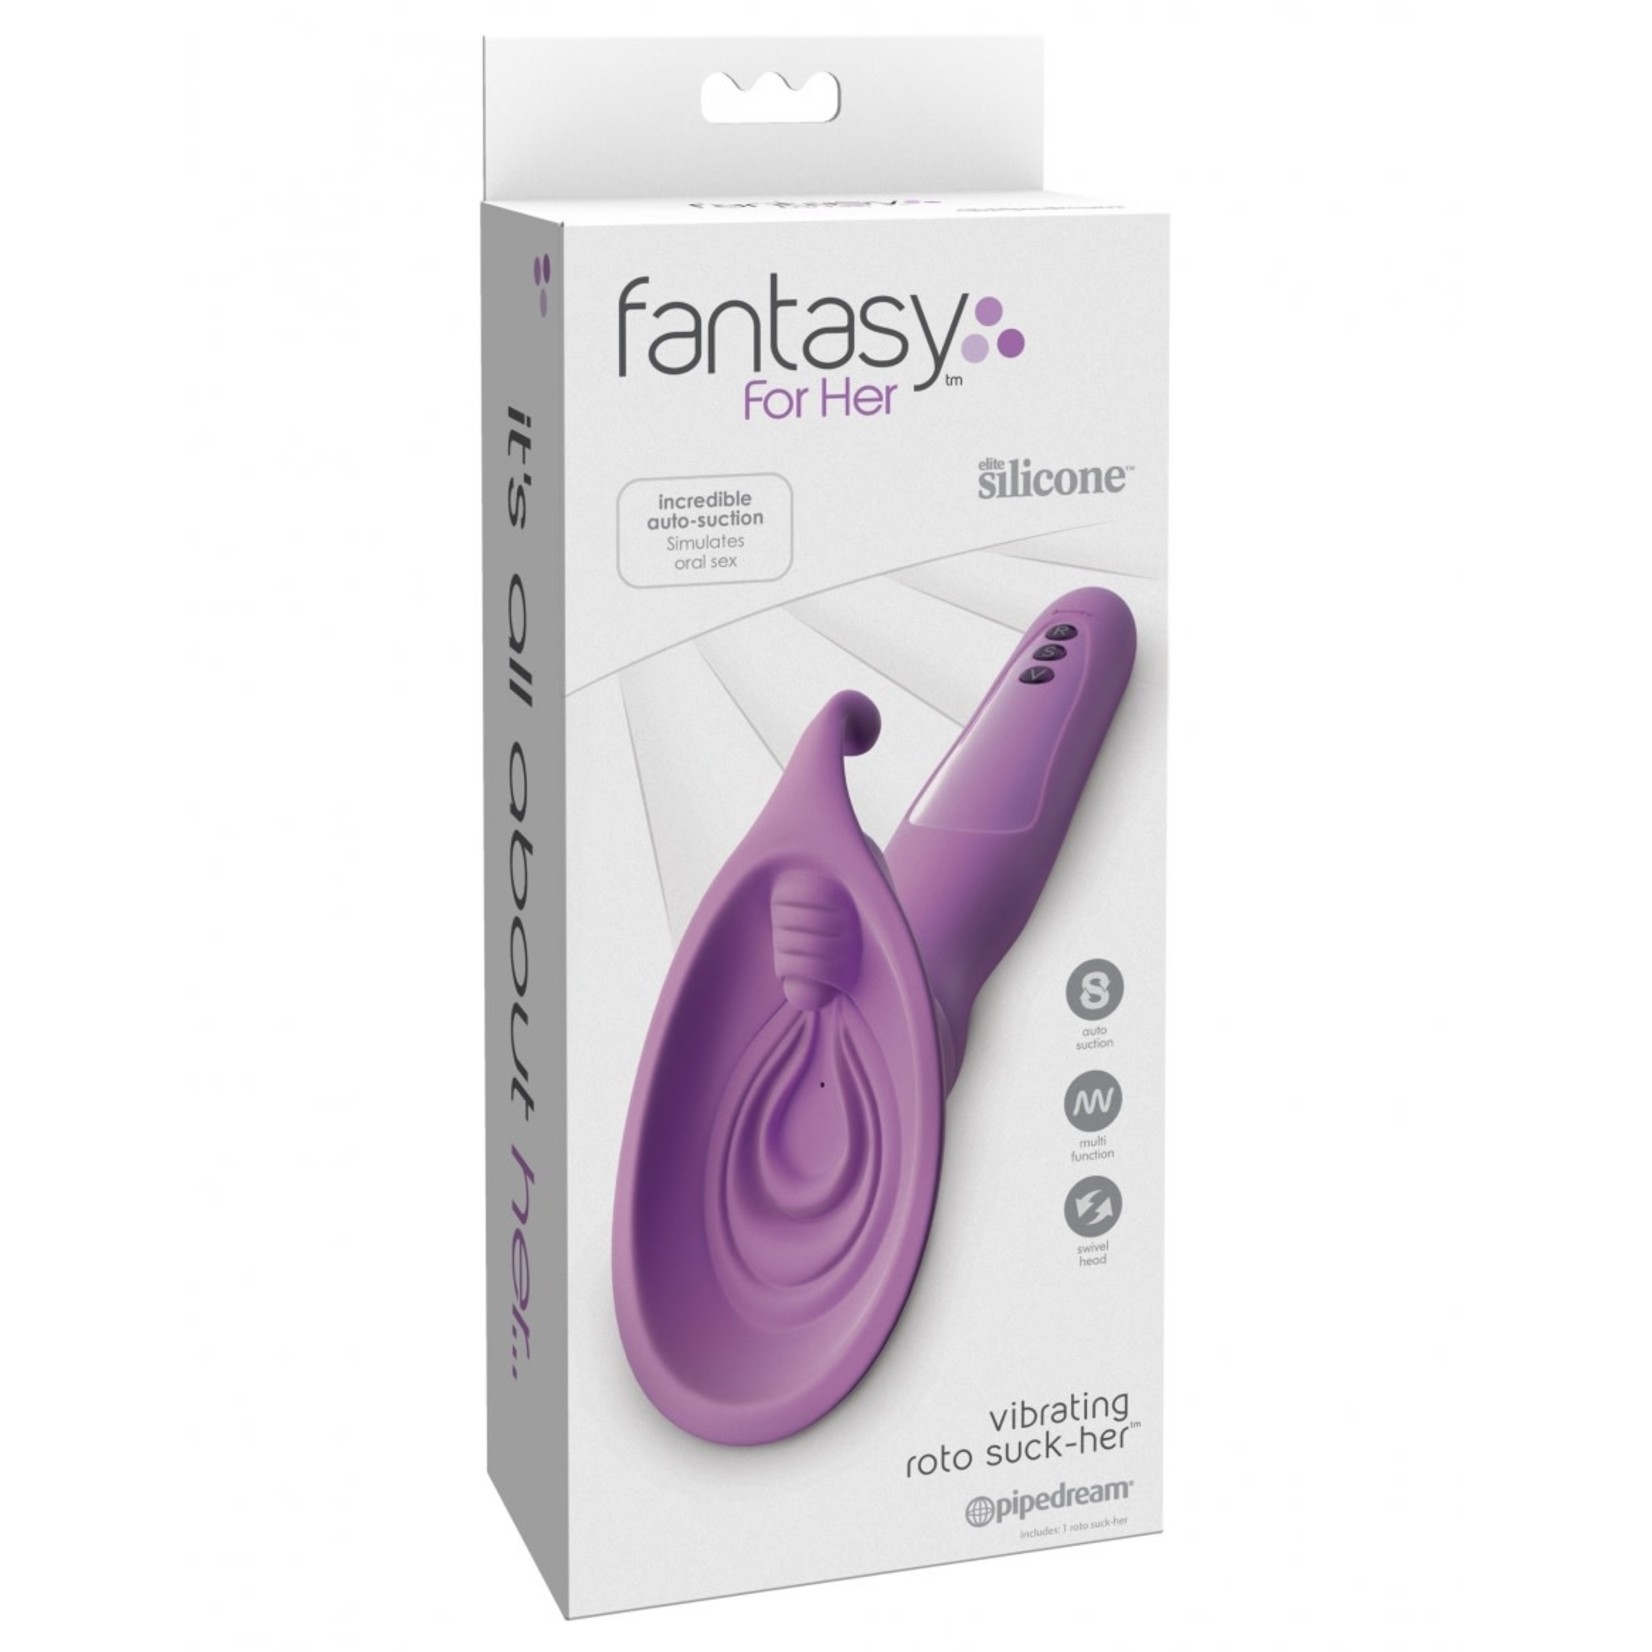 FANTASY FOR HER FANTASY FOR HER VIBRATING ROTO SUCK-HER